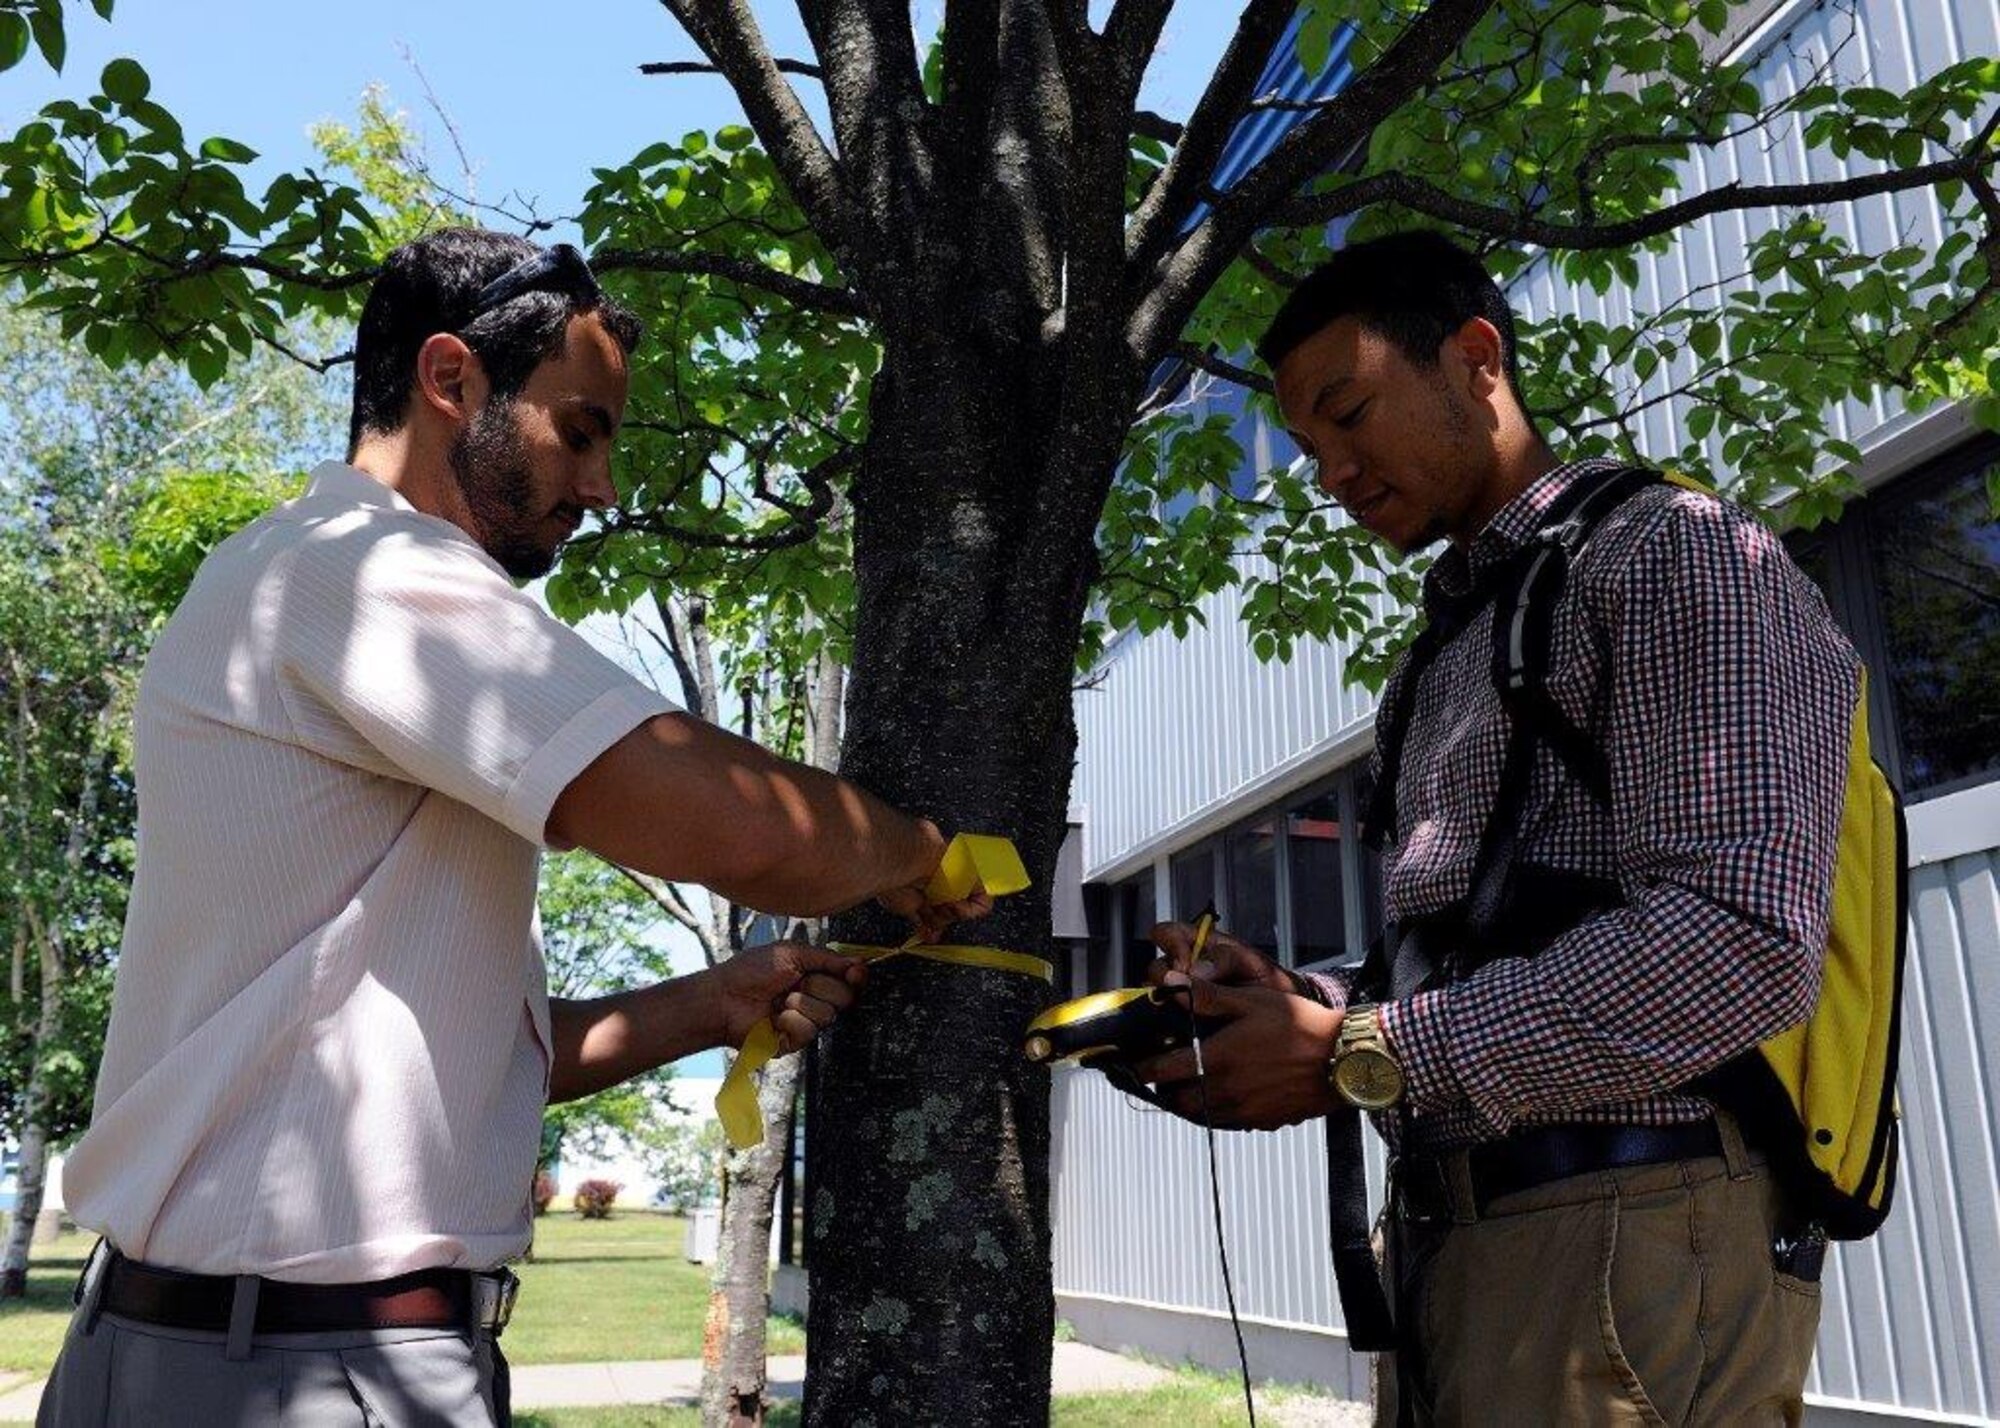 Thurgood Marshall College Fund student James Reed (right)
conducting a GIS inventory of trees and real property assets during his internship with the Information Directorate at Rome Laboratory. (Photo from Rome Laboratory)